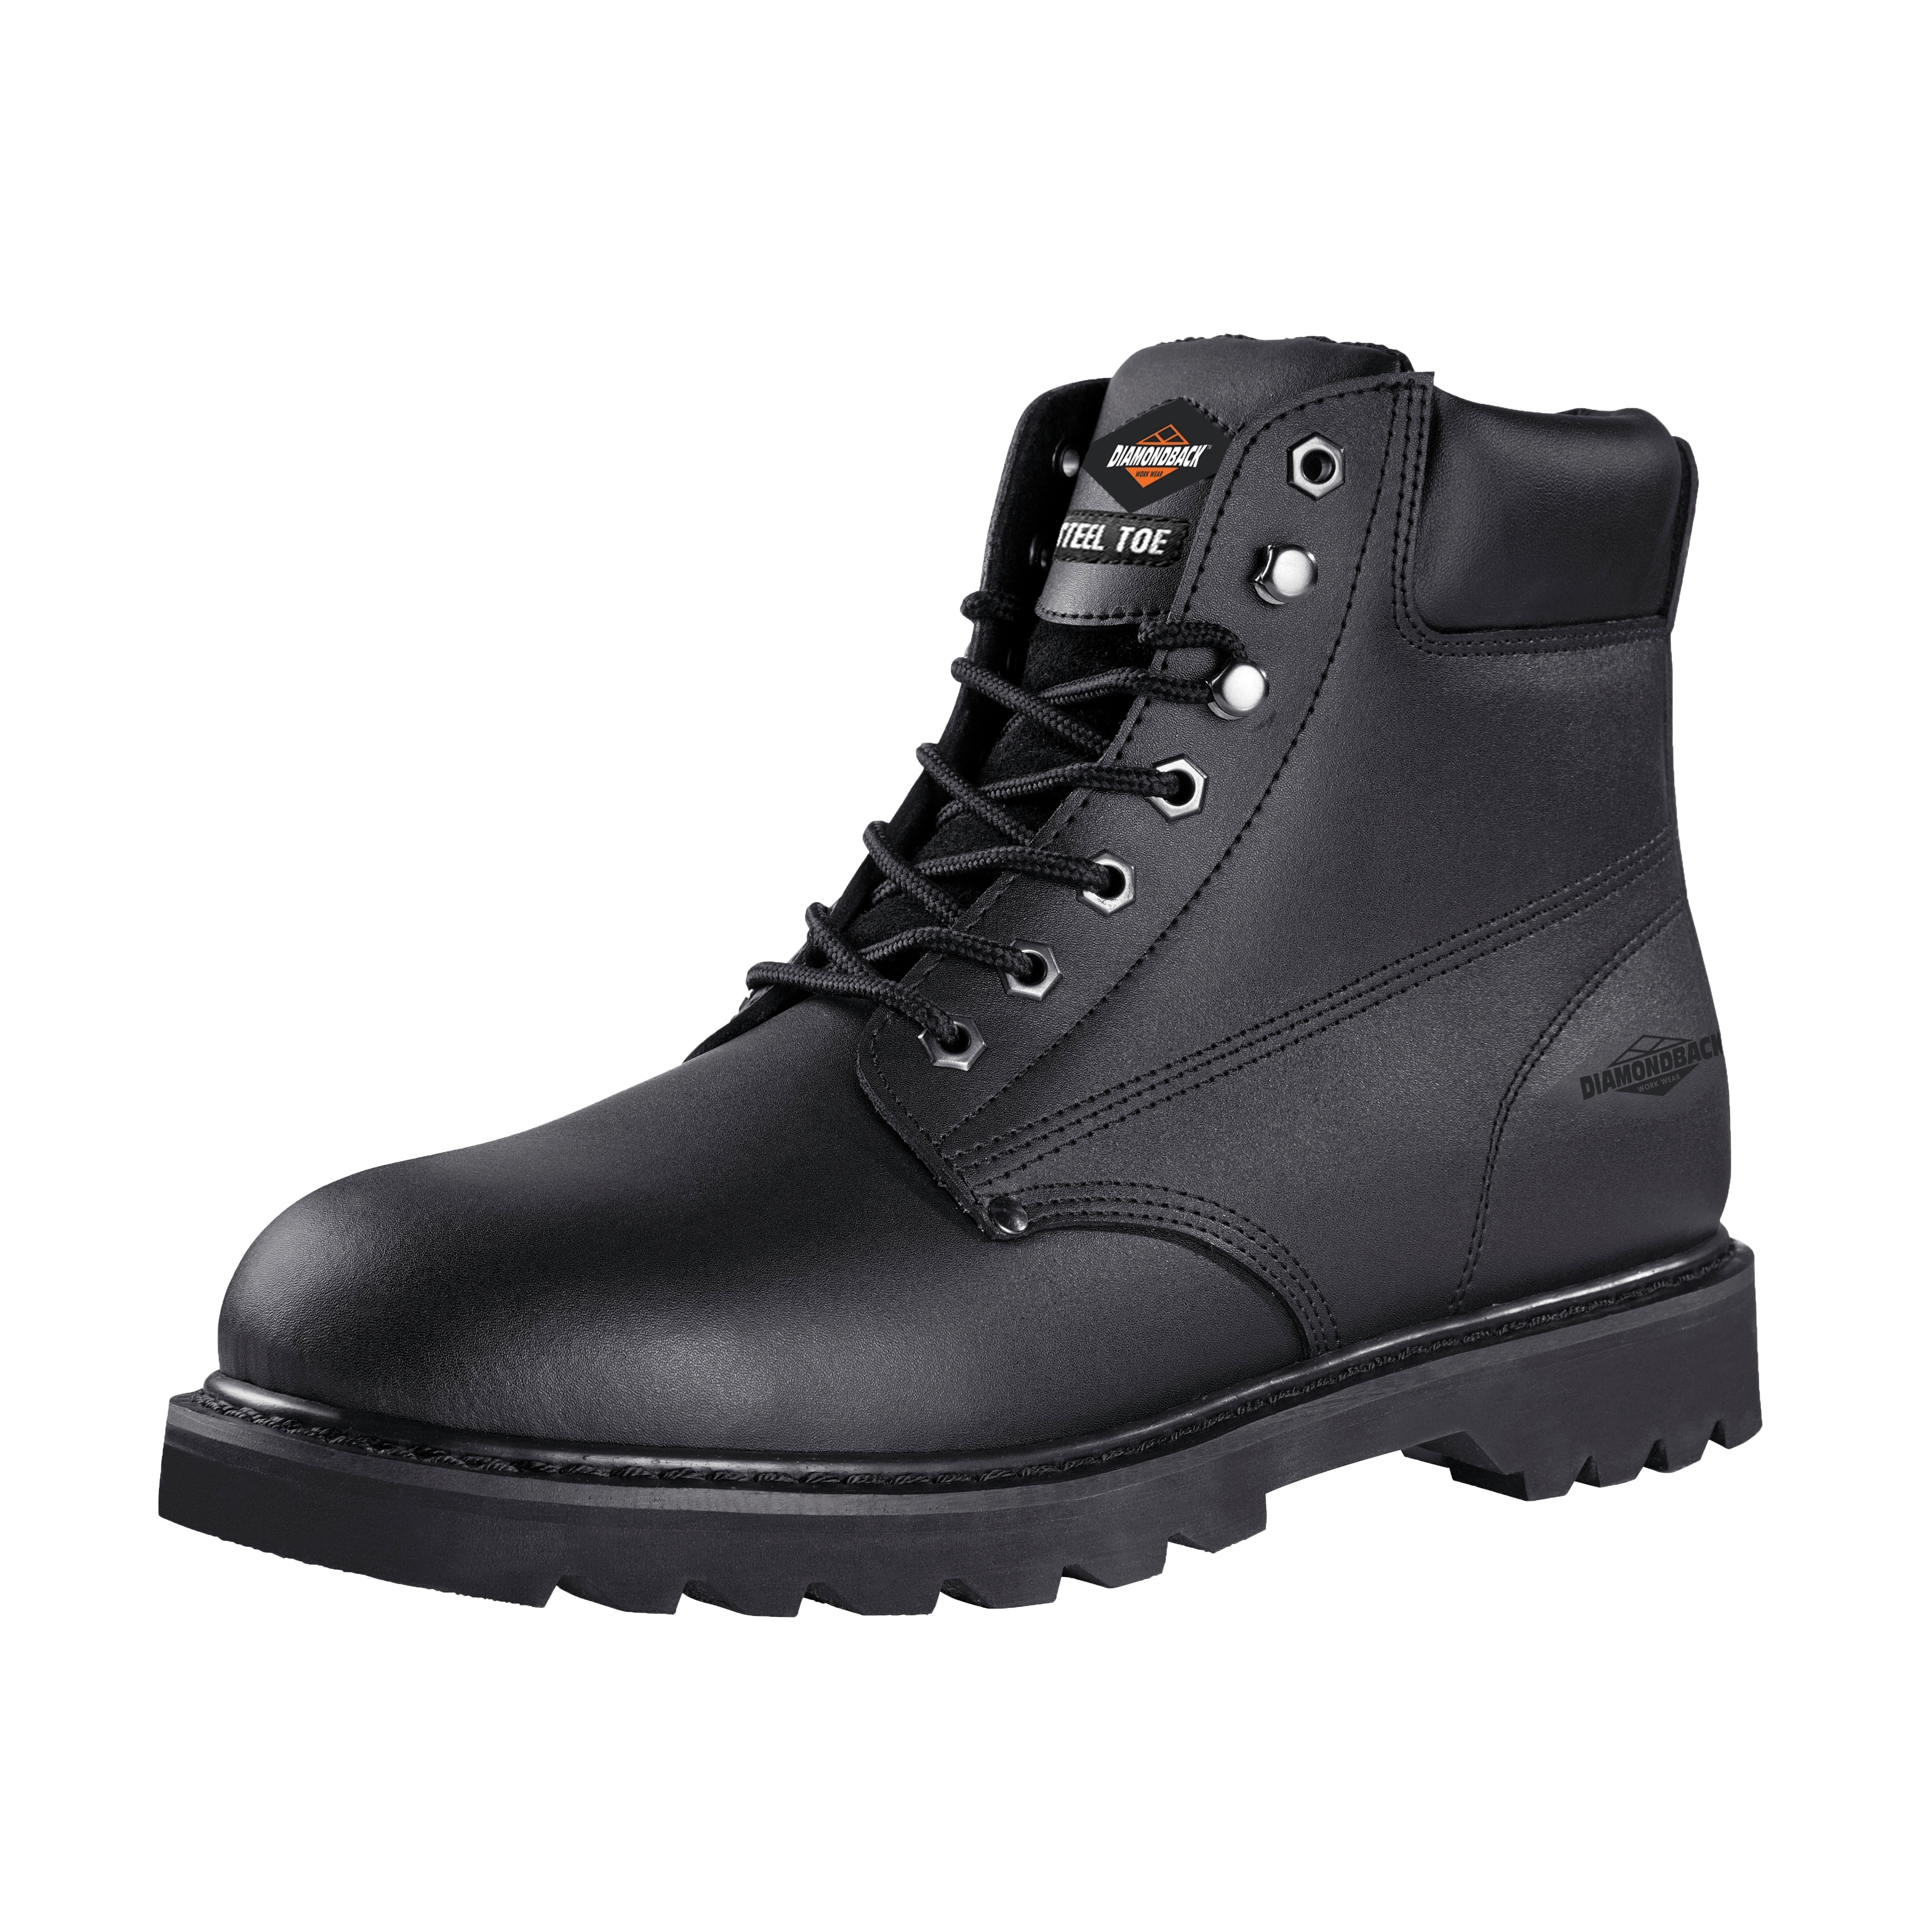 Work Boots, 11, Medium W, Black, Leather Upper, Lace-Up, Steel Toe, With Lining